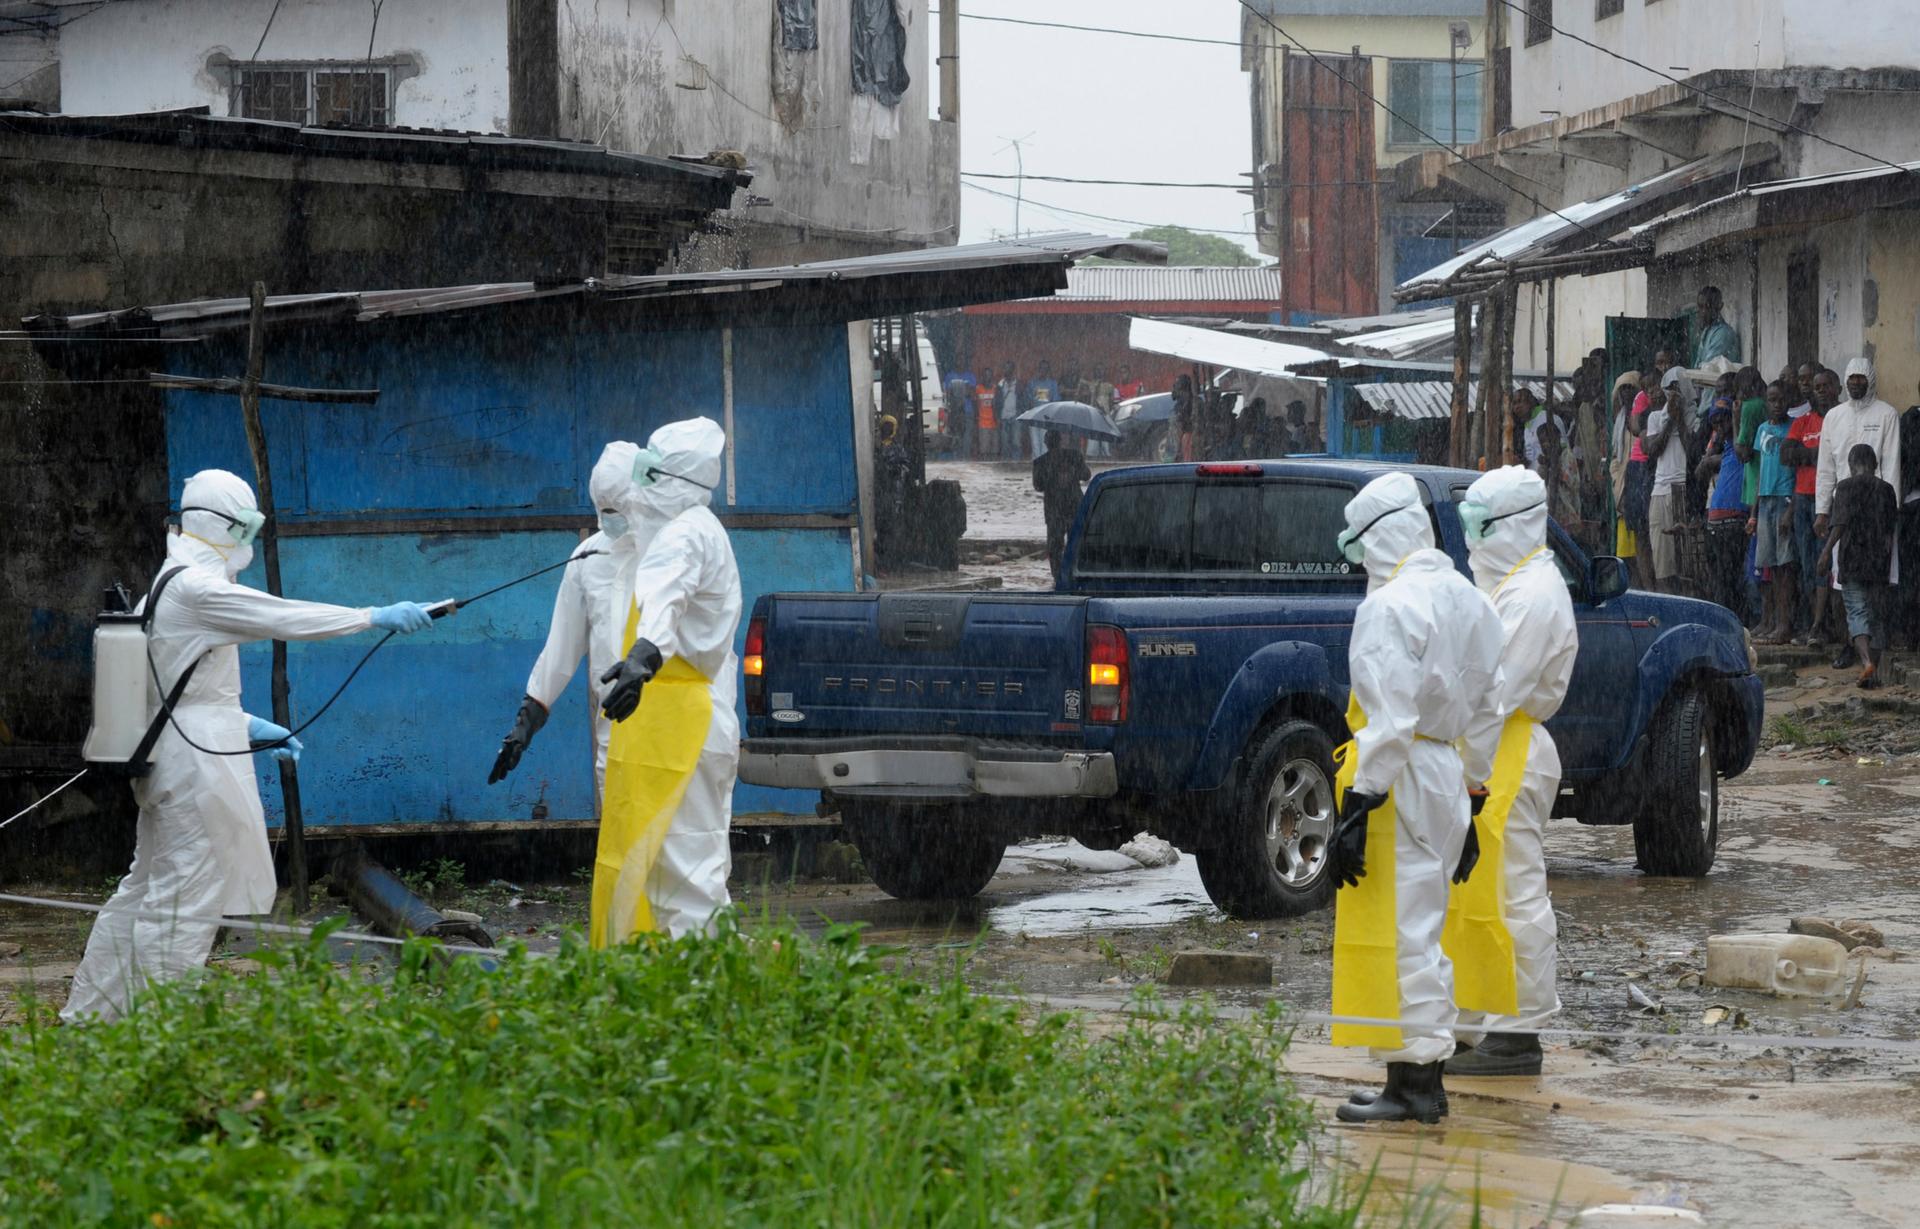 Health workers wearing protective clothing disinfect themselves after an abandoned dead body presenting with Ebola symptoms was found at Duwala market in Monrovia, Liberia, on August 17, 2014.